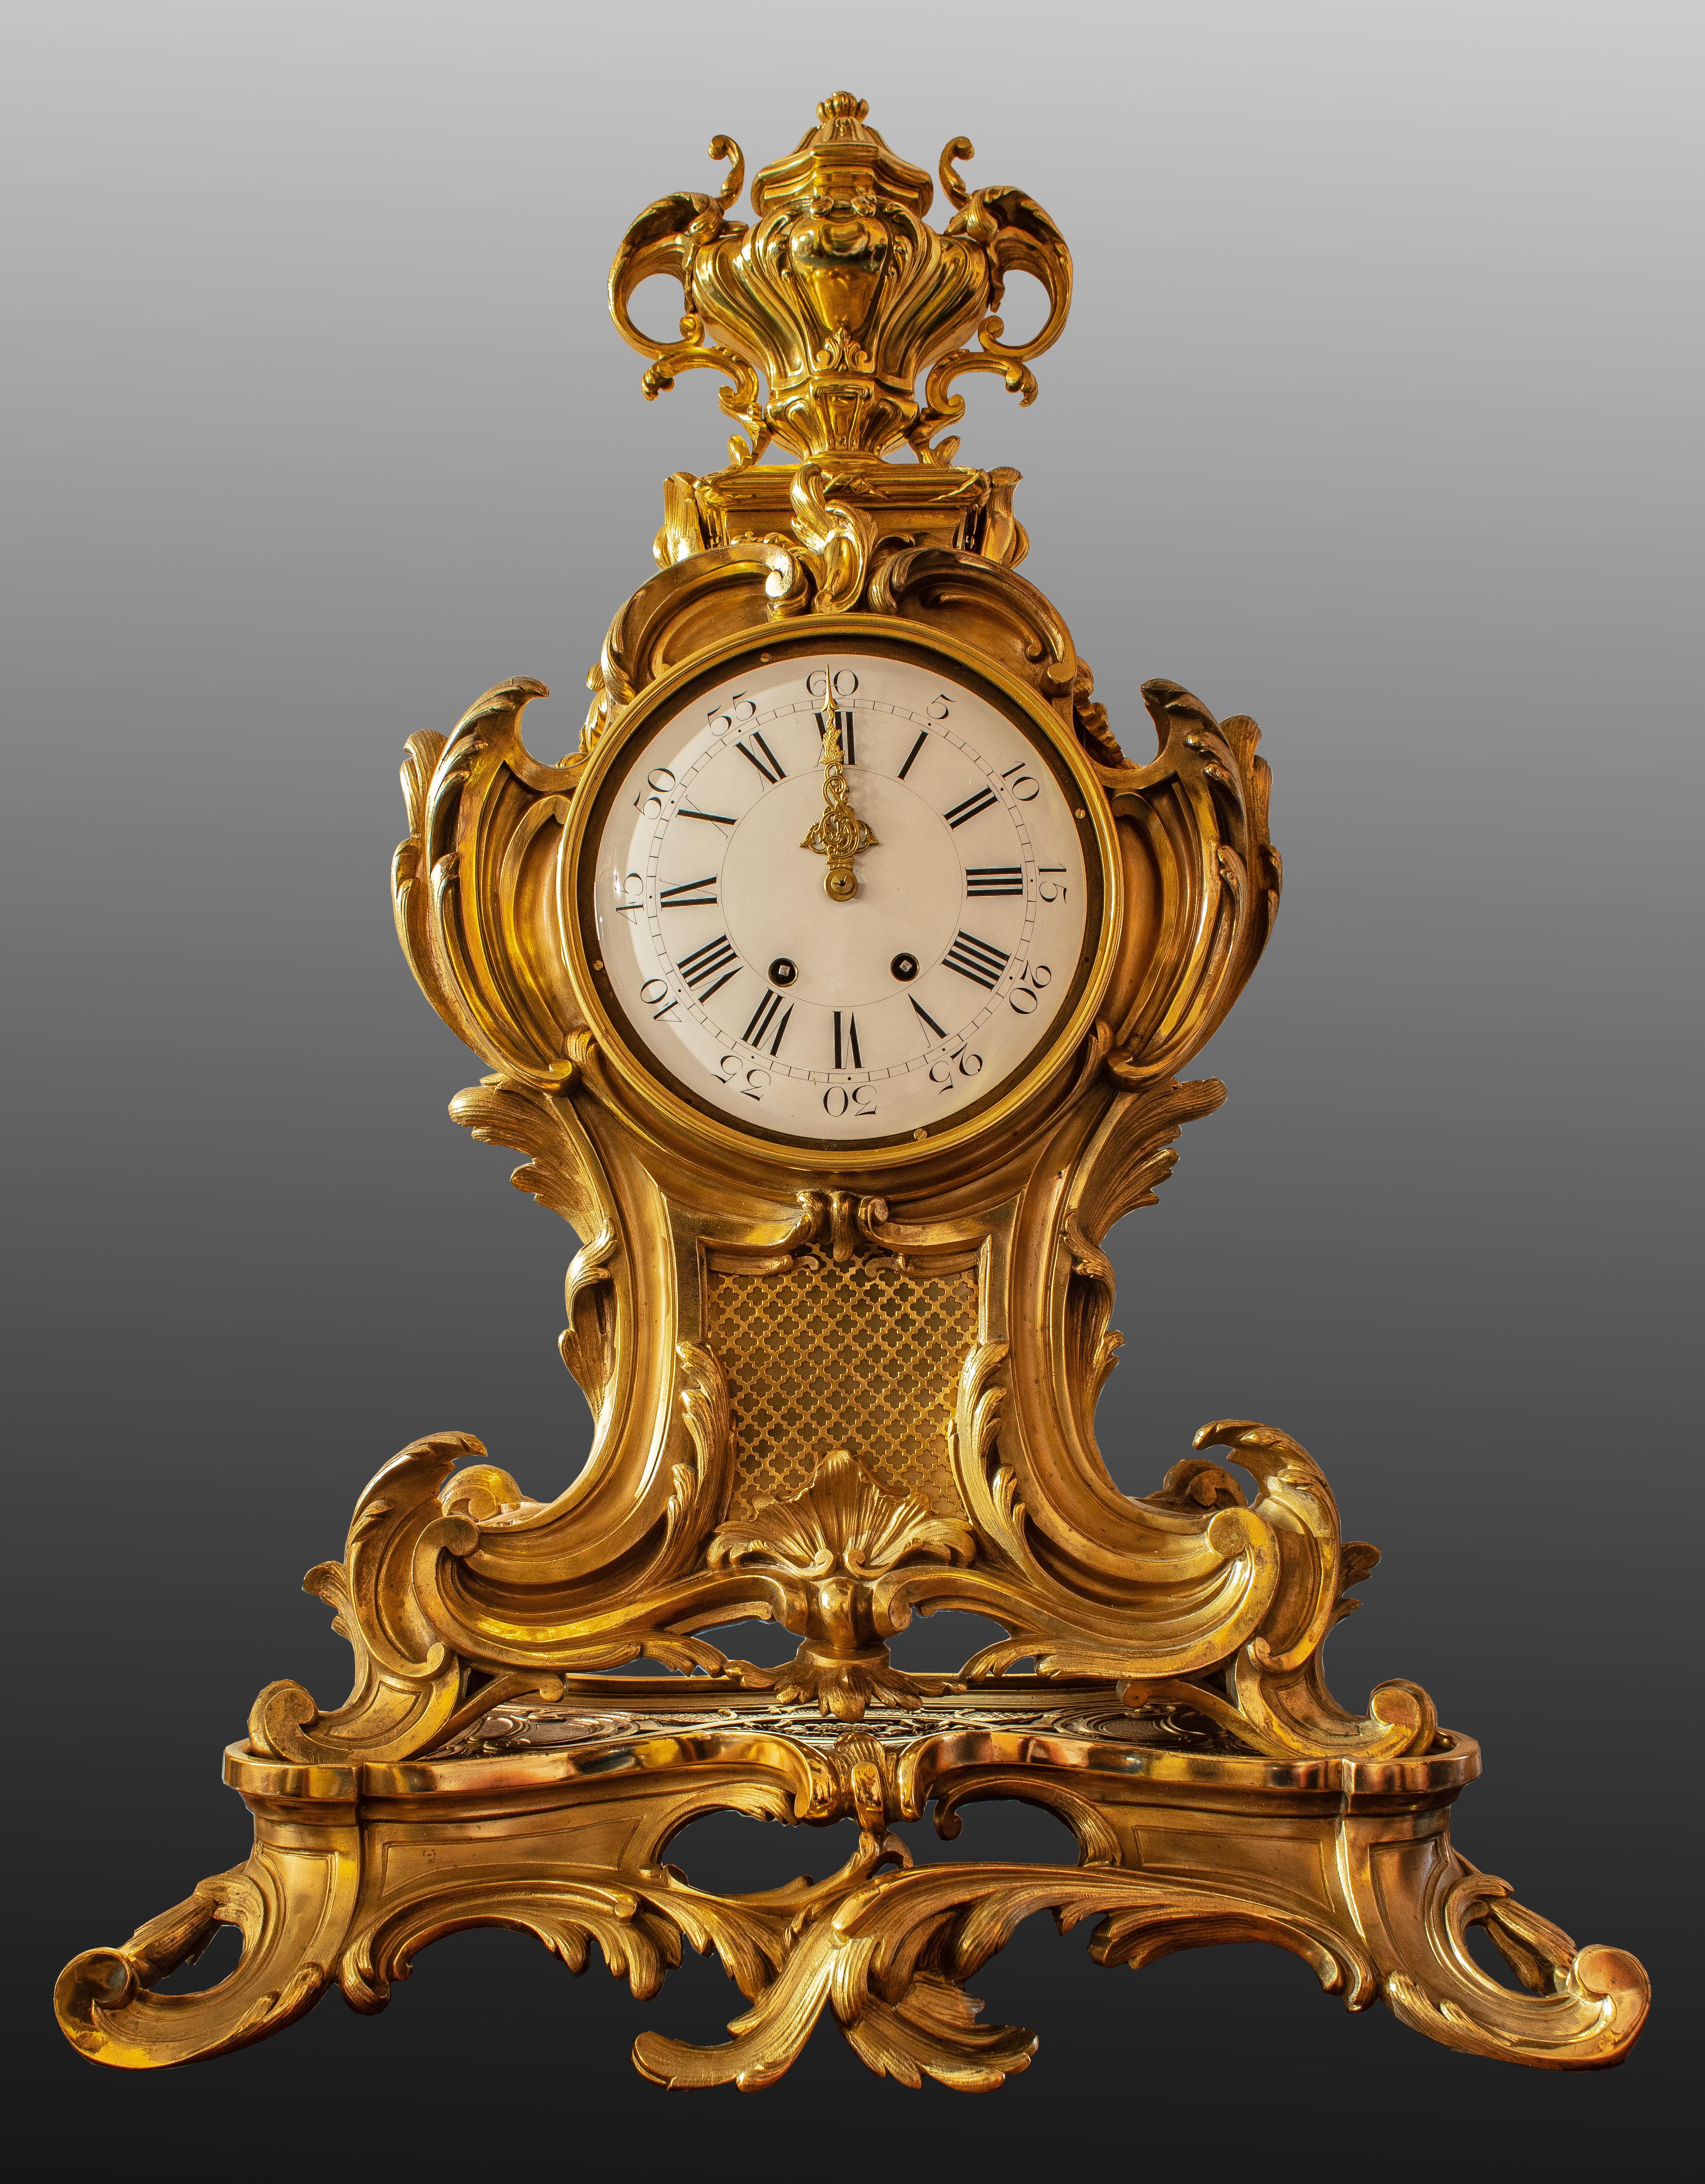 A very large 19th century French gilt bronze Louis XV style clock on stand.